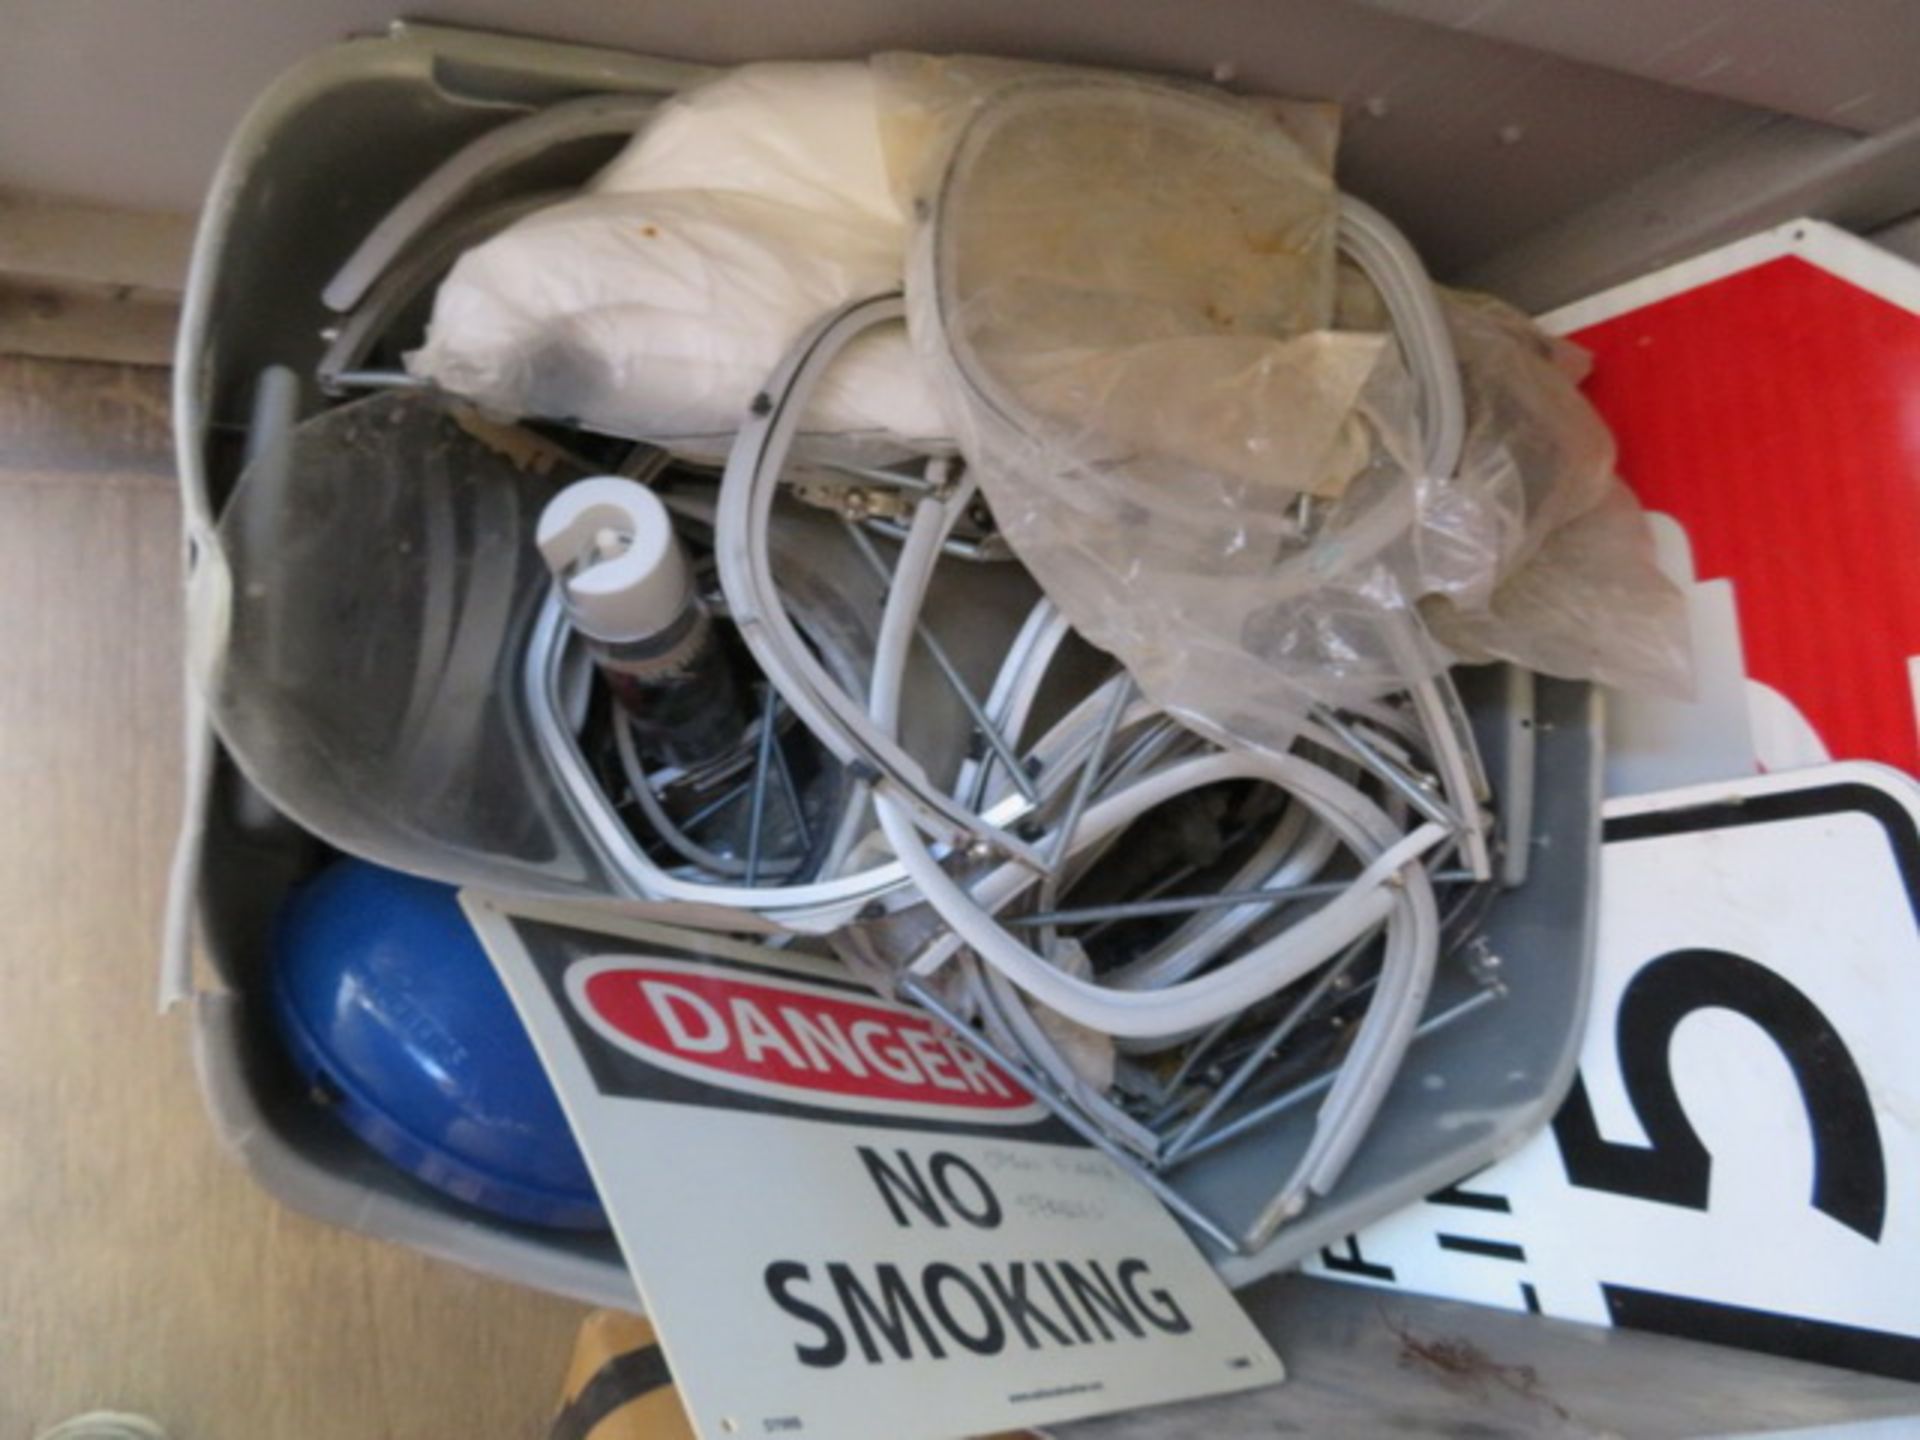 Contents of Shipping Container. To Include 1/2" PVDF Tubing, Safety Glasses, Safety Signs, - Image 3 of 51